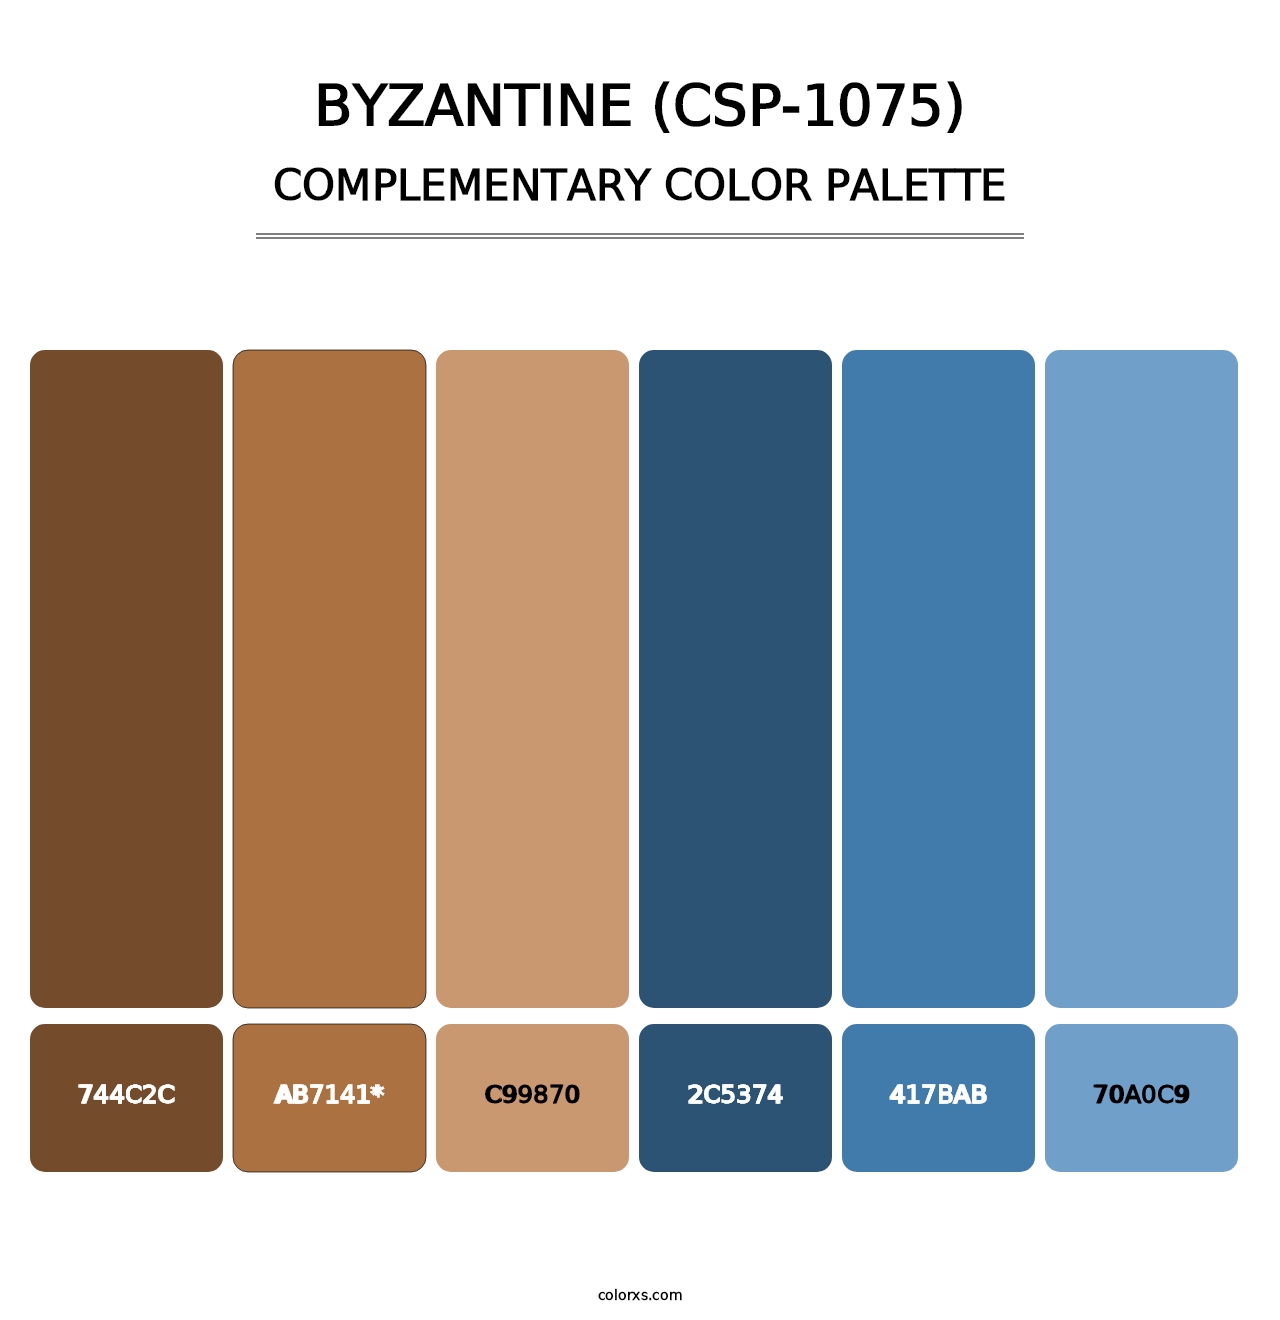 Byzantine (CSP-1075) - Complementary Color Palette